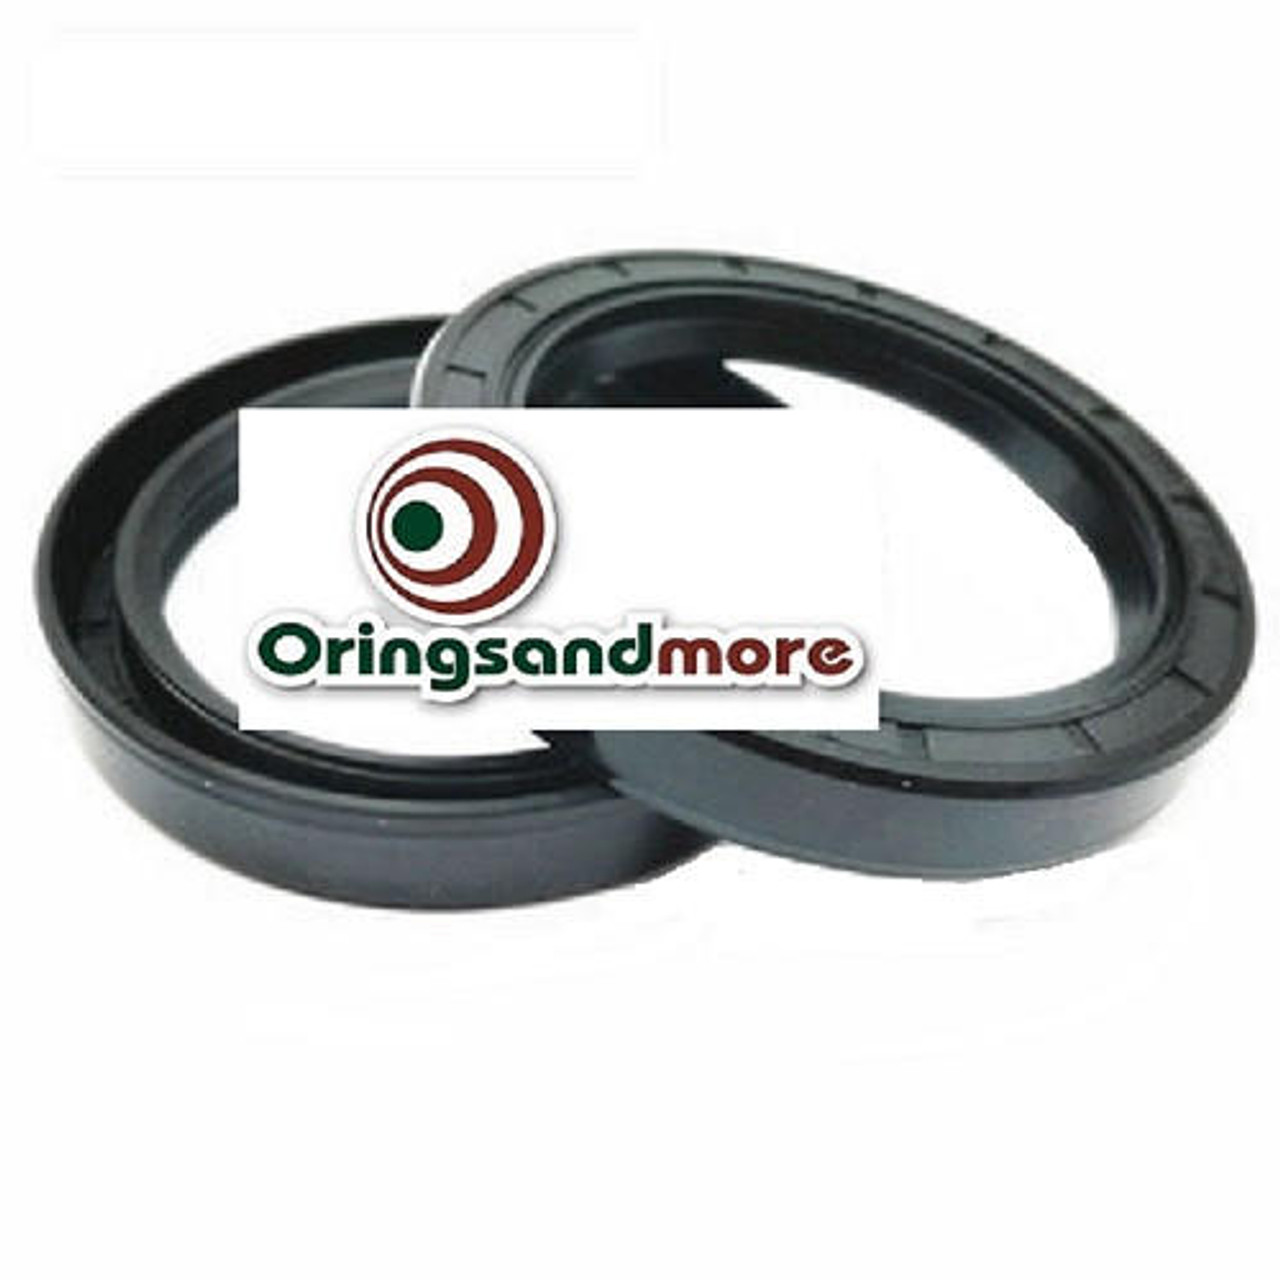 Metric Oil Shaft Seal 72 x 88 x 8mm Double Lip   Price for 1 pc